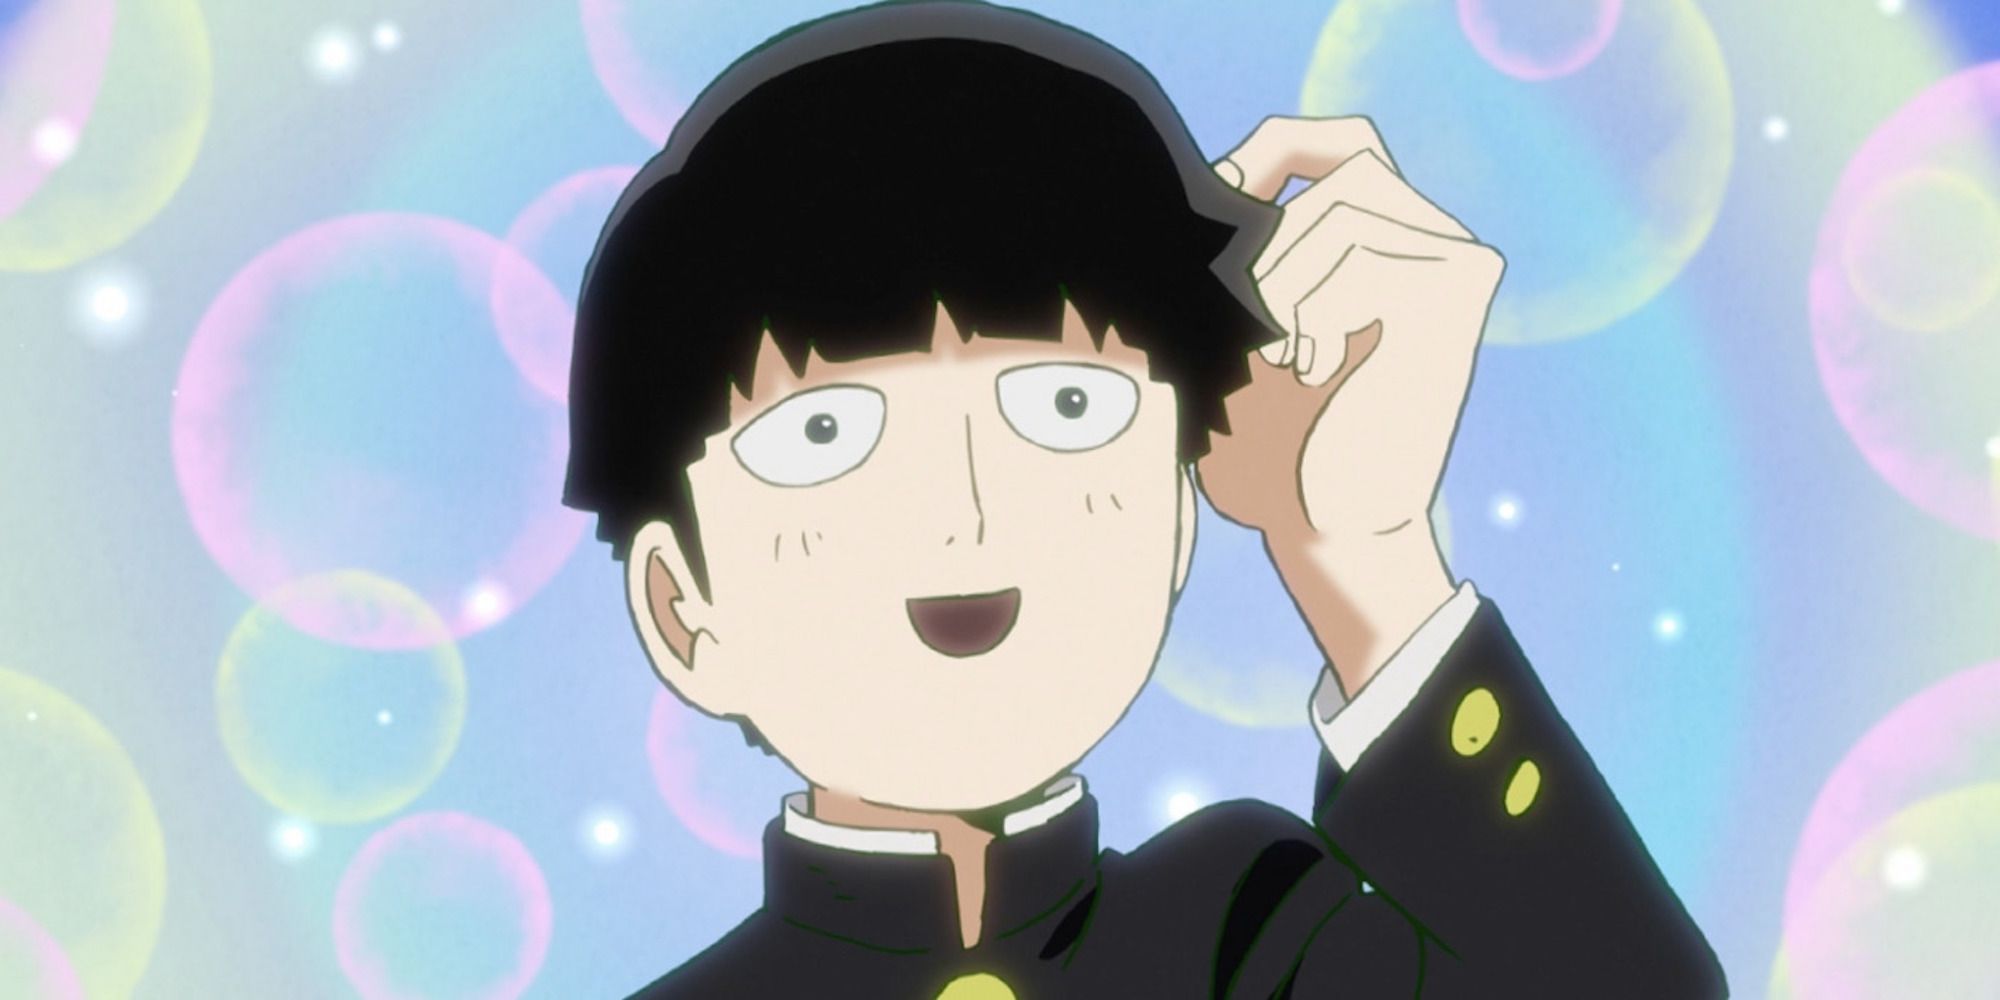 Mob from Mob Psycho 100